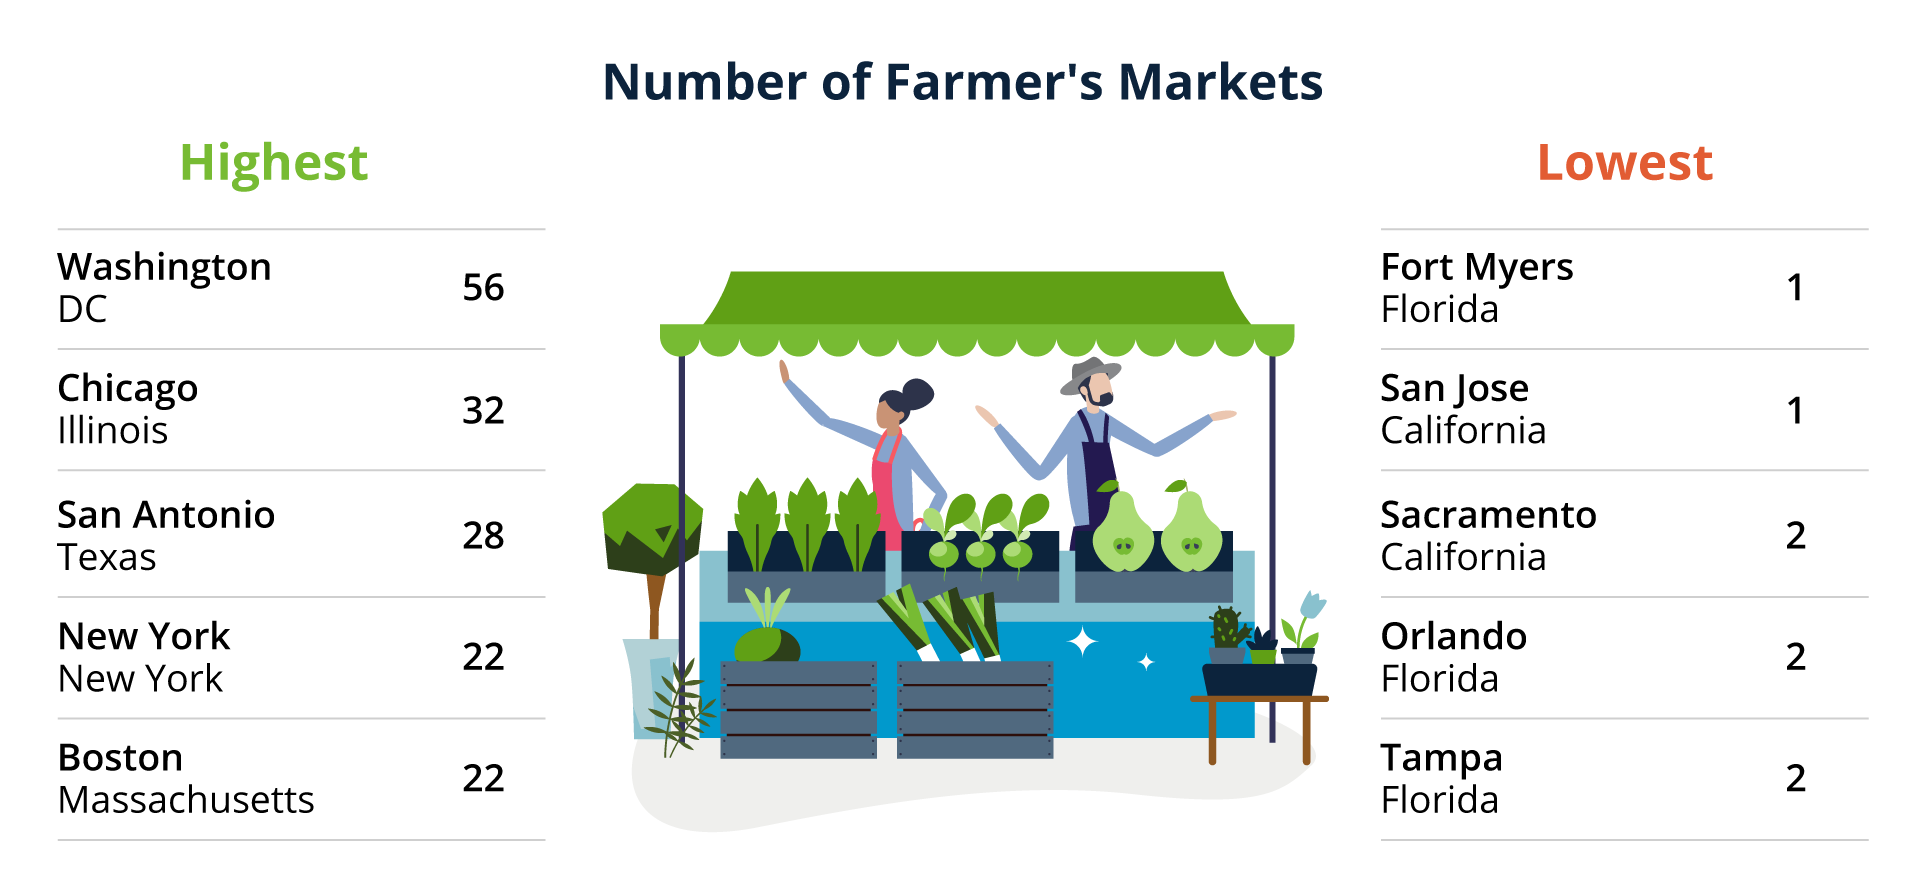 Number of Farmer's Markets